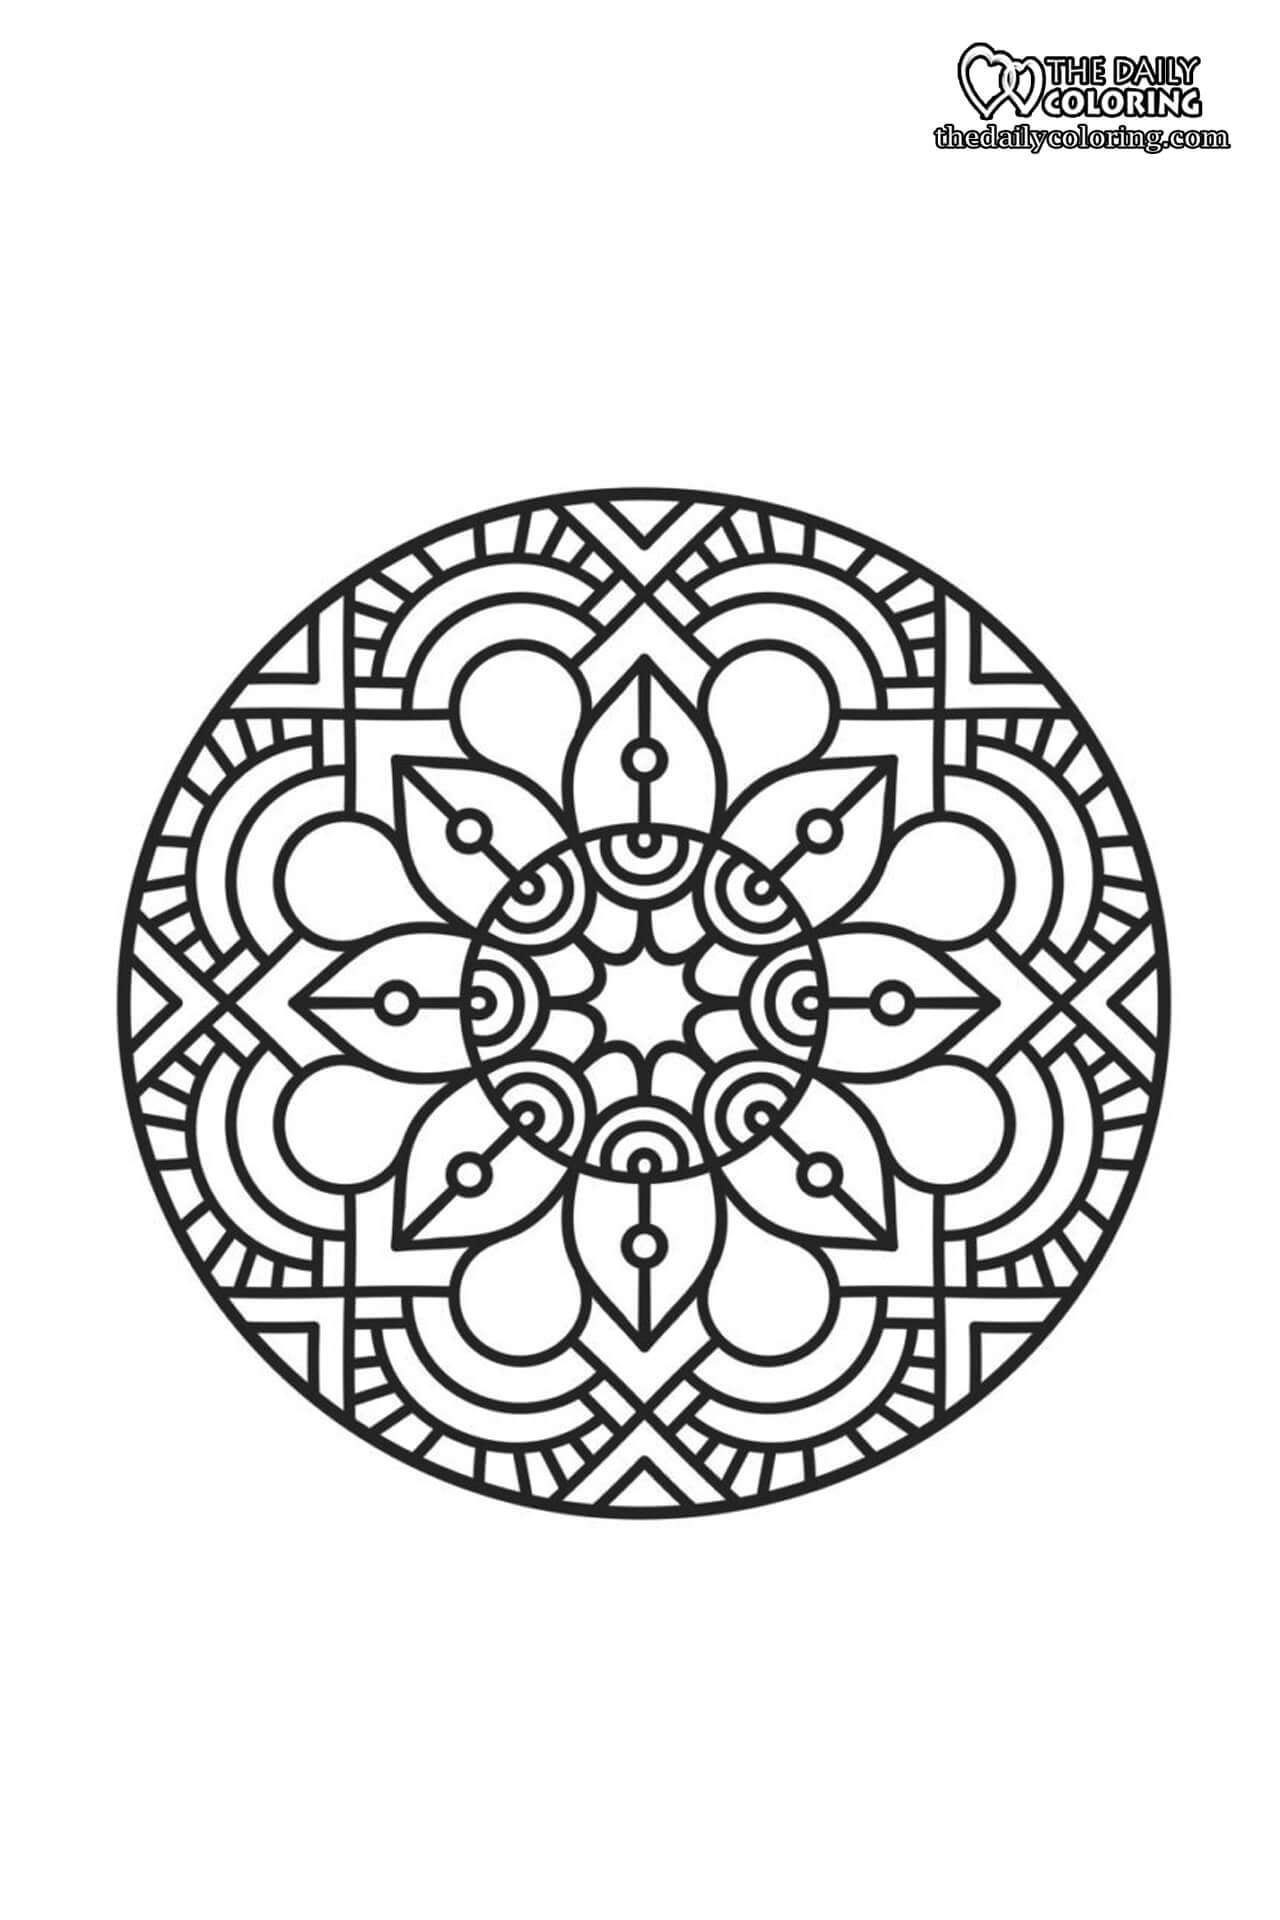 Easy Mandala Coloring Pages   The Daily Coloring - bestcoloring-pages.com